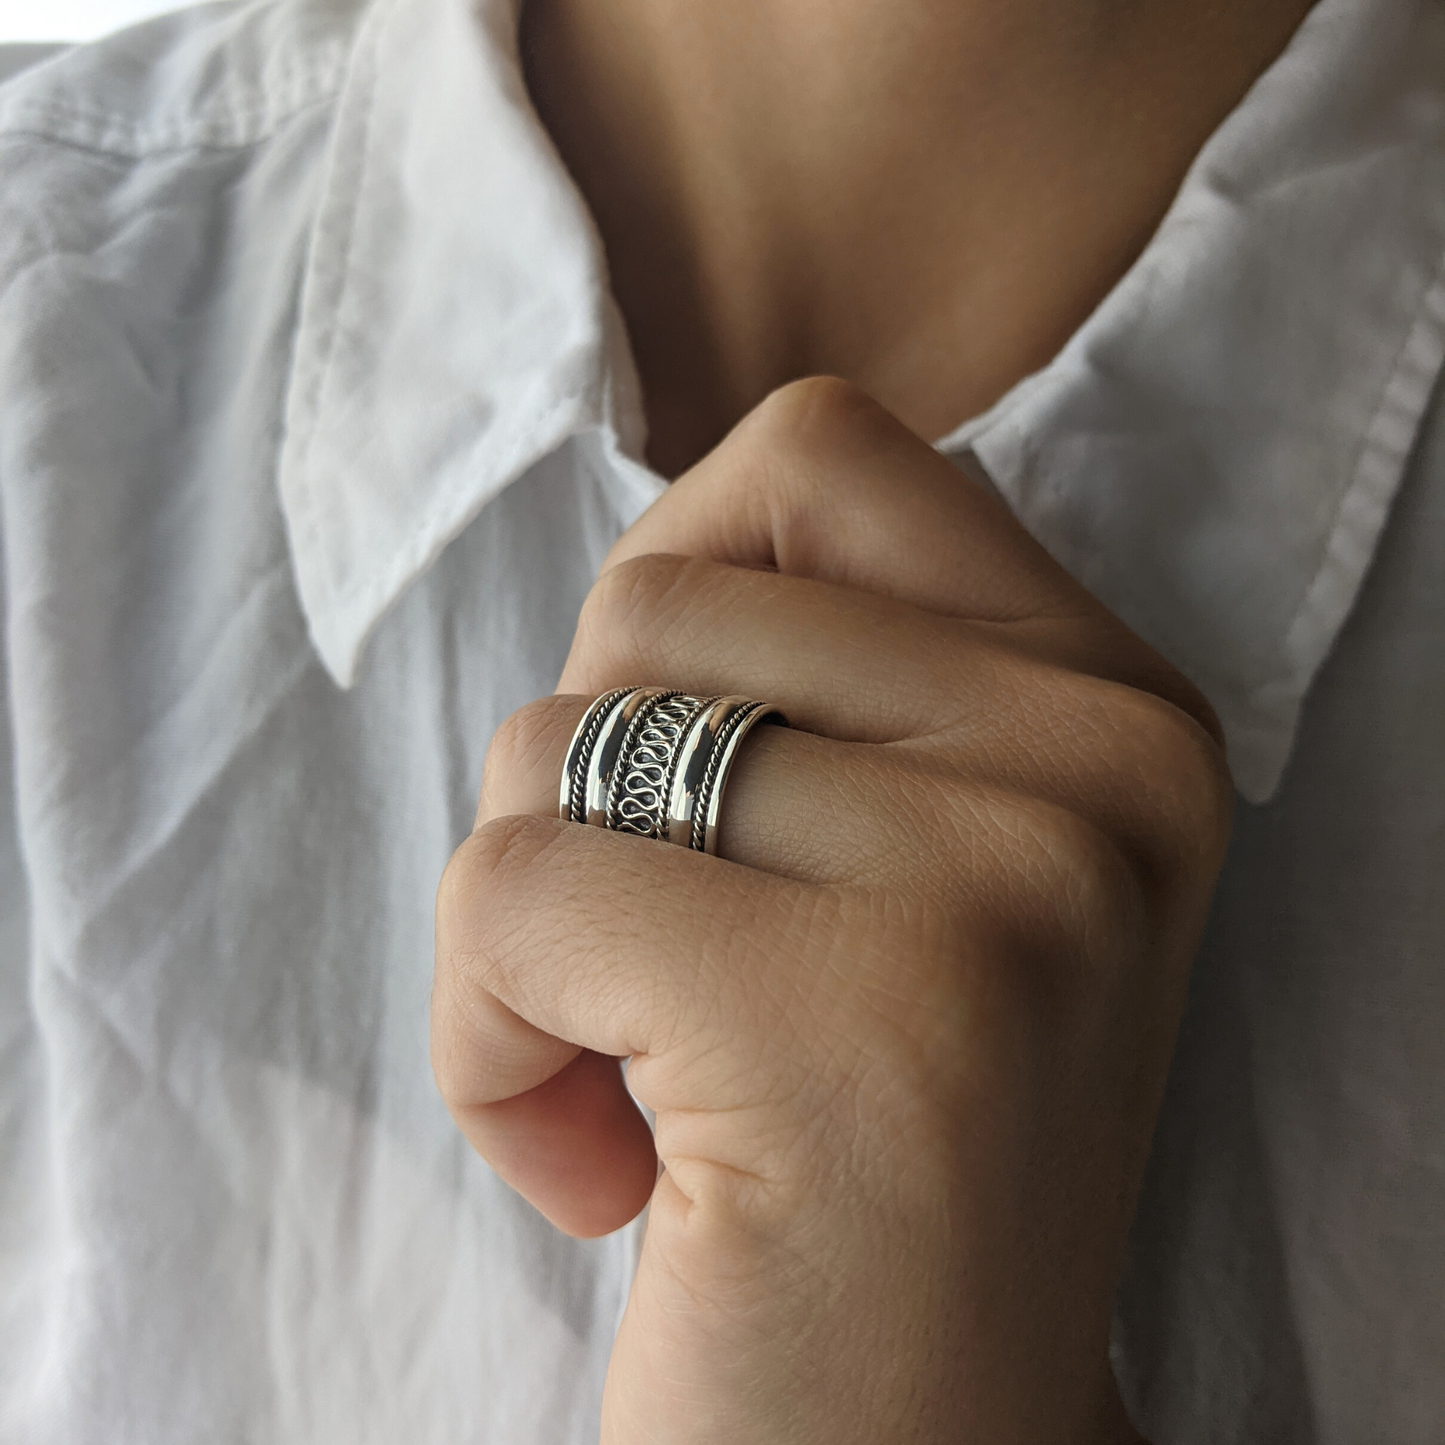 Silverly Chunky Woven Sterling Silver Rings for Women and Men